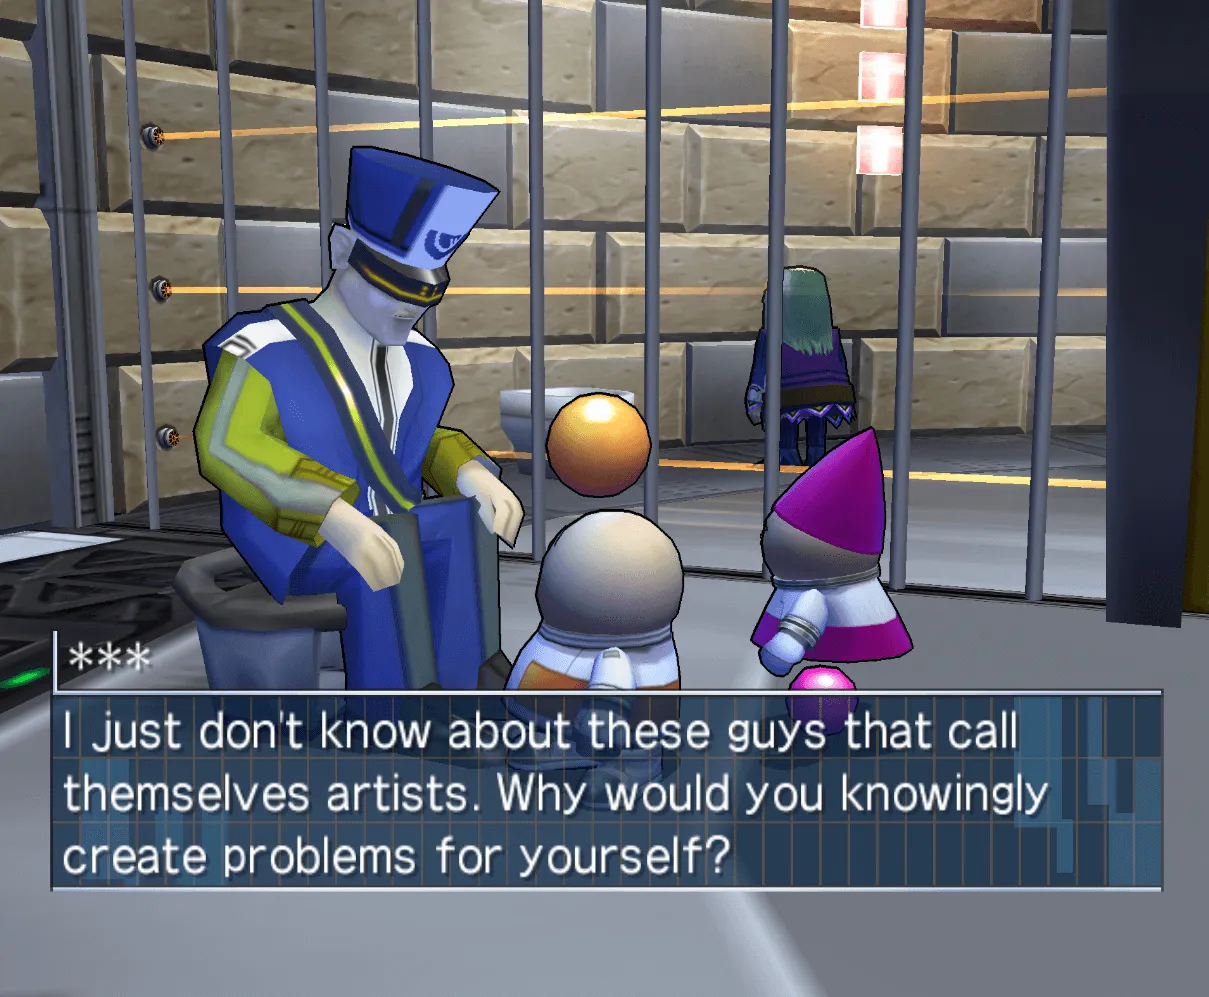 Opoona talking to a prison guard. The dialogue reads: I just don't know about these guys that call themselves artists. Why would you knowingly create problems for yourself?